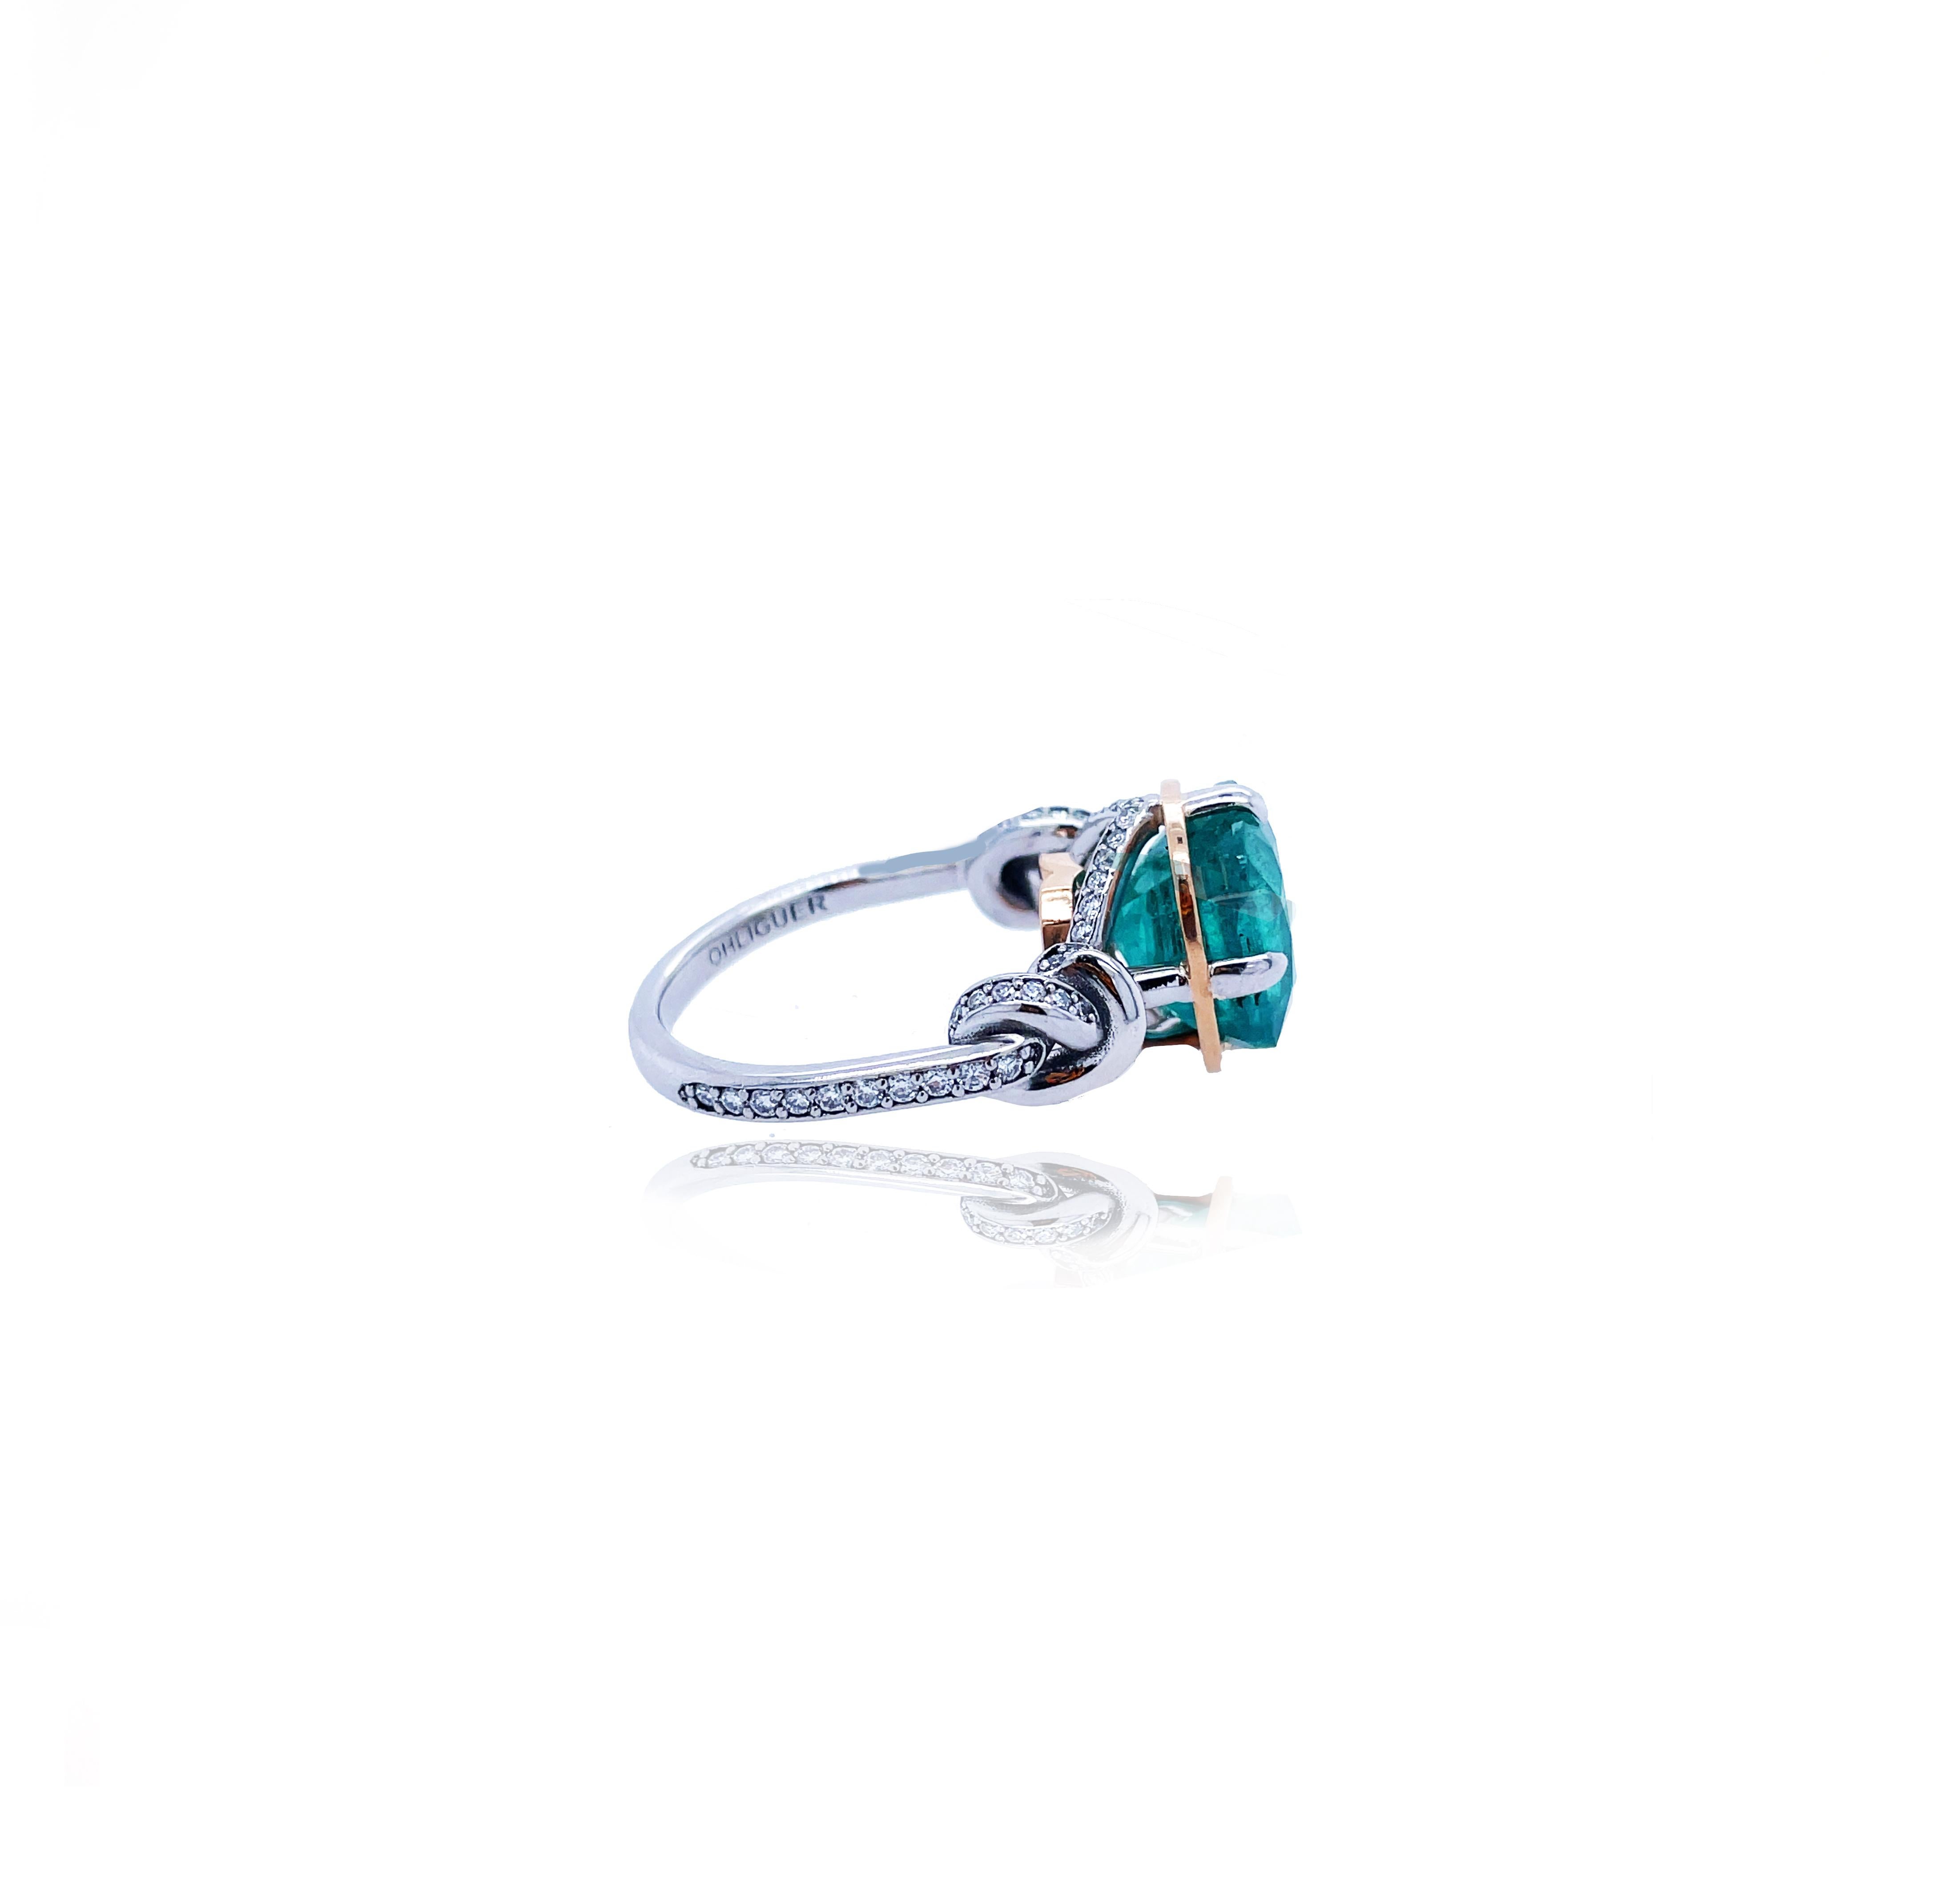 For Sale:  4.96ct Natural Cushion Cut Emerald and Diamond Ring in platinum and 22k gold 2